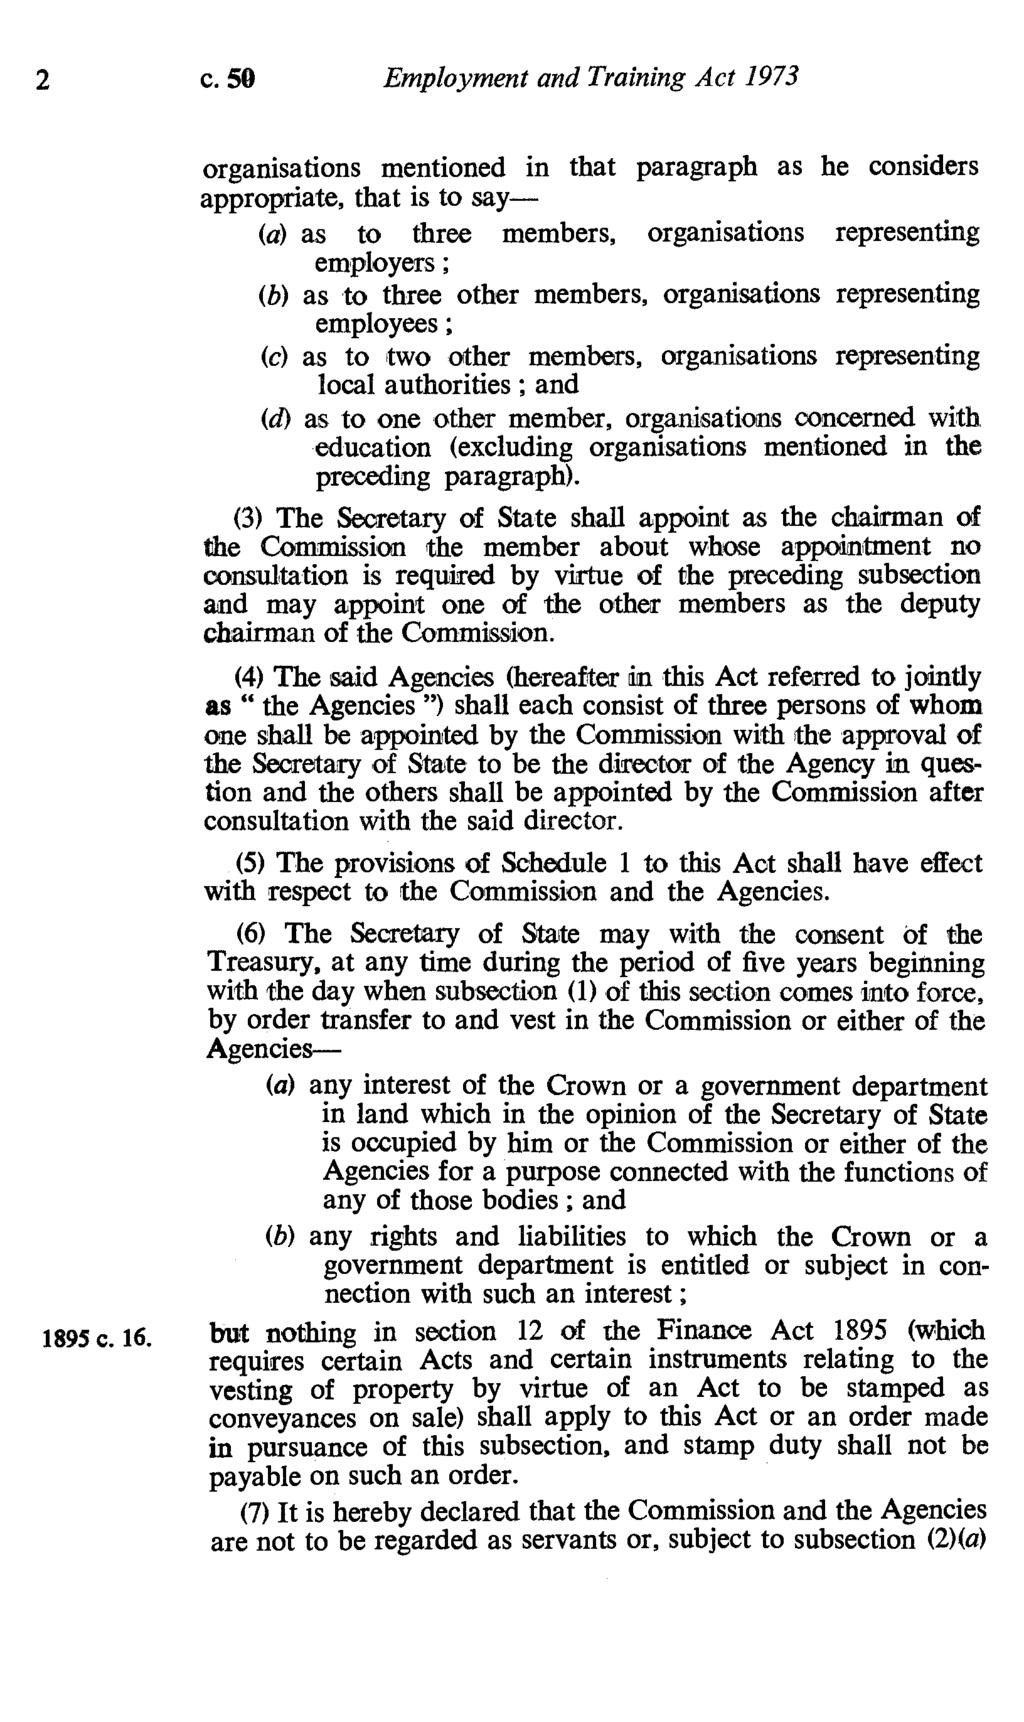 2 c. 50 Employment and Training Act 1973 1895 c. 16.